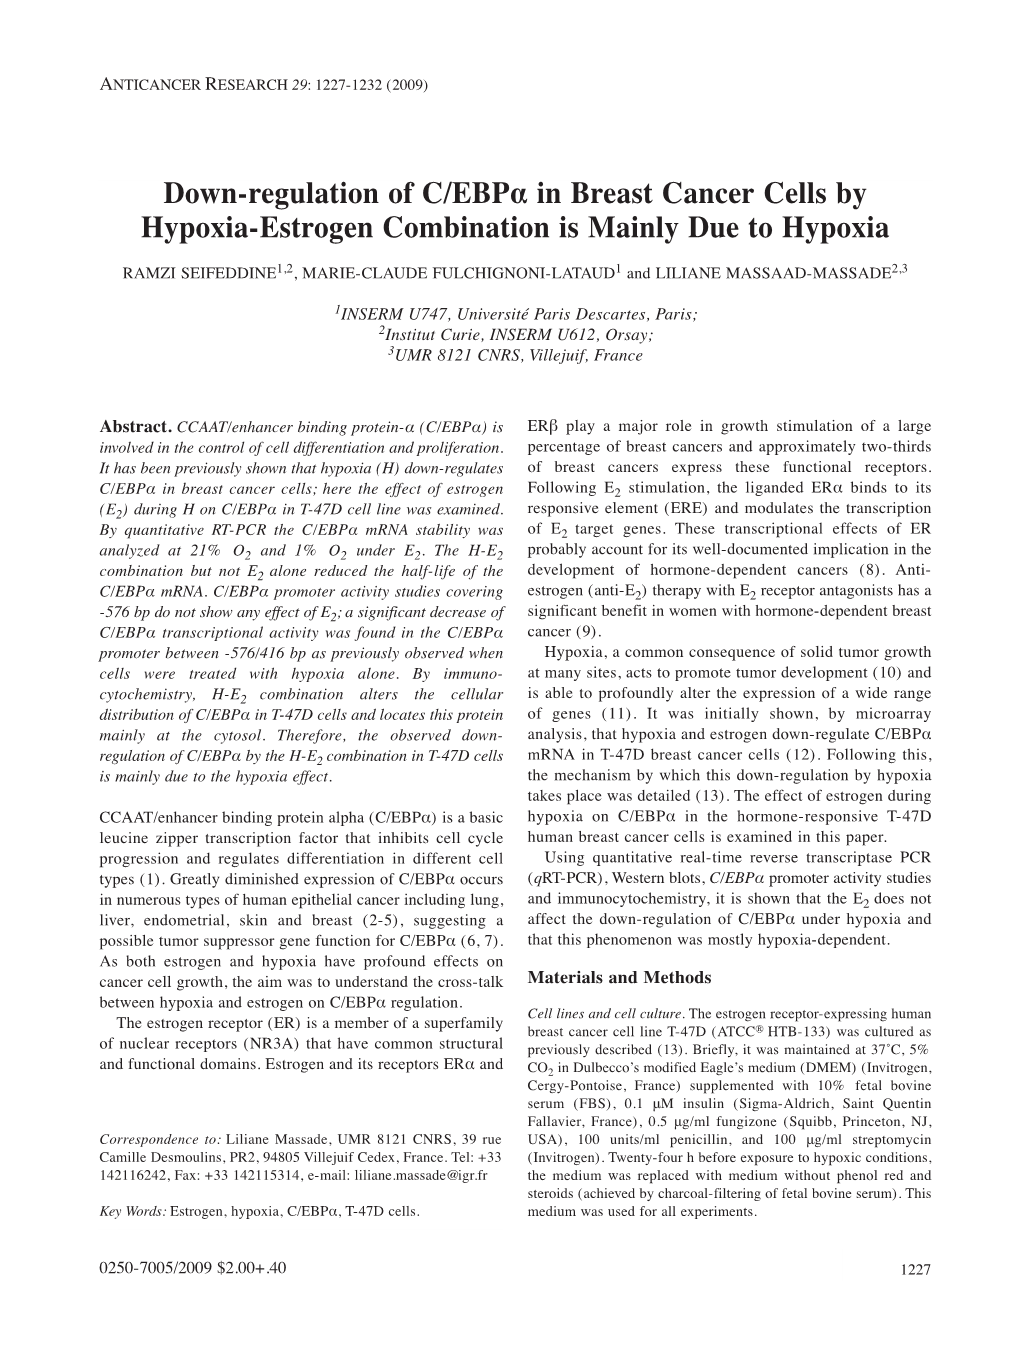 Down-Regulation of C/Ebpα in Breast Cancer Cells by Hypoxia-Estrogen Combination Is Mainly Due to Hypoxia